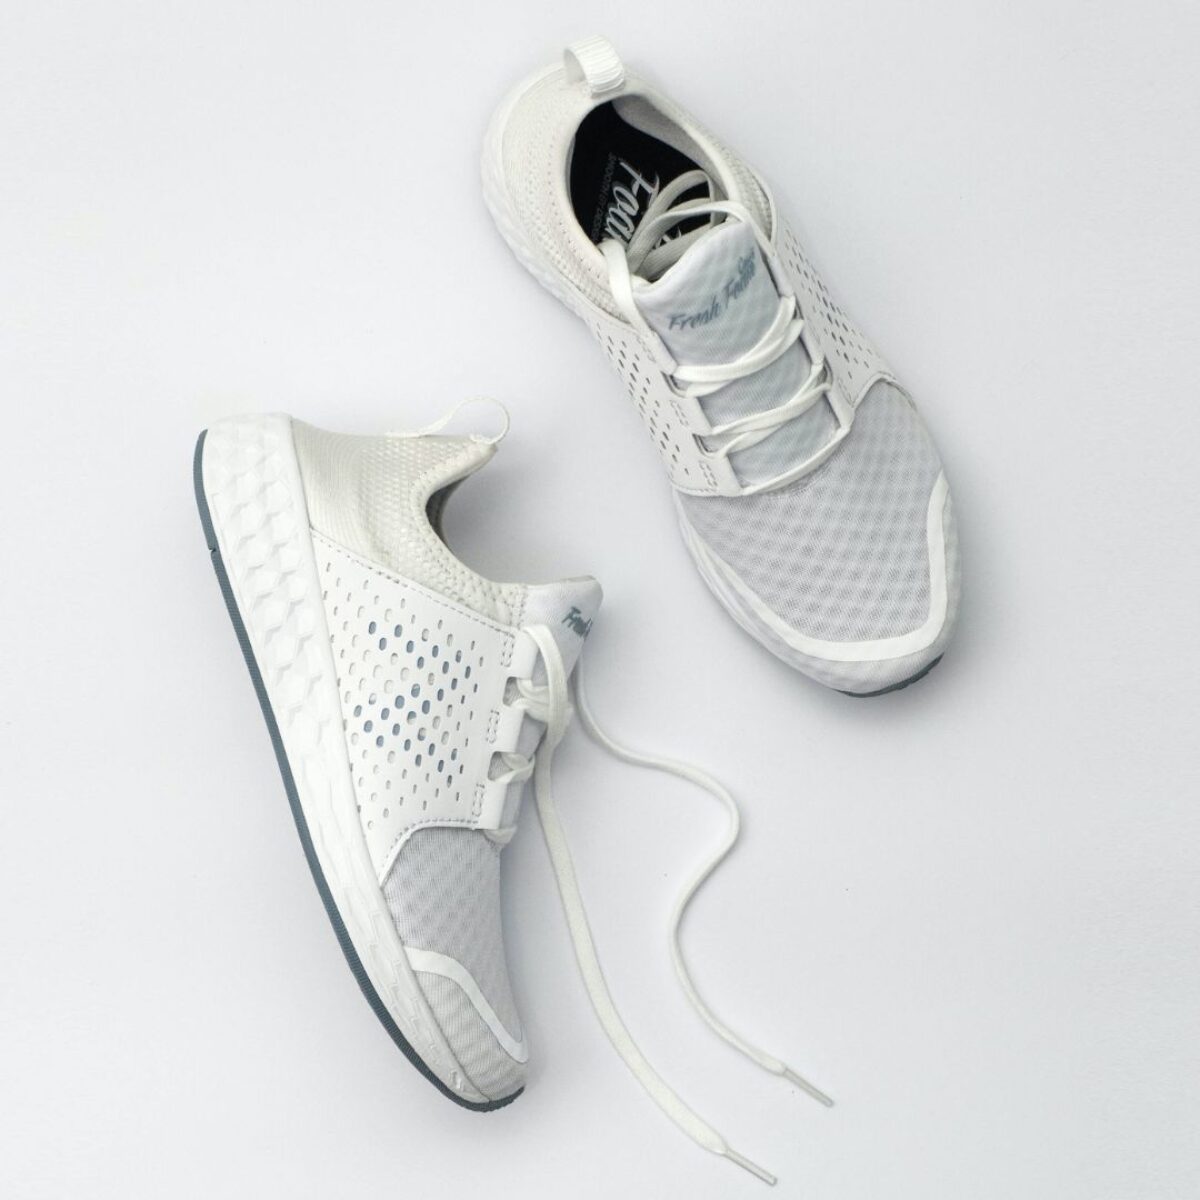 Best white trainers for men 2022 to suit your style